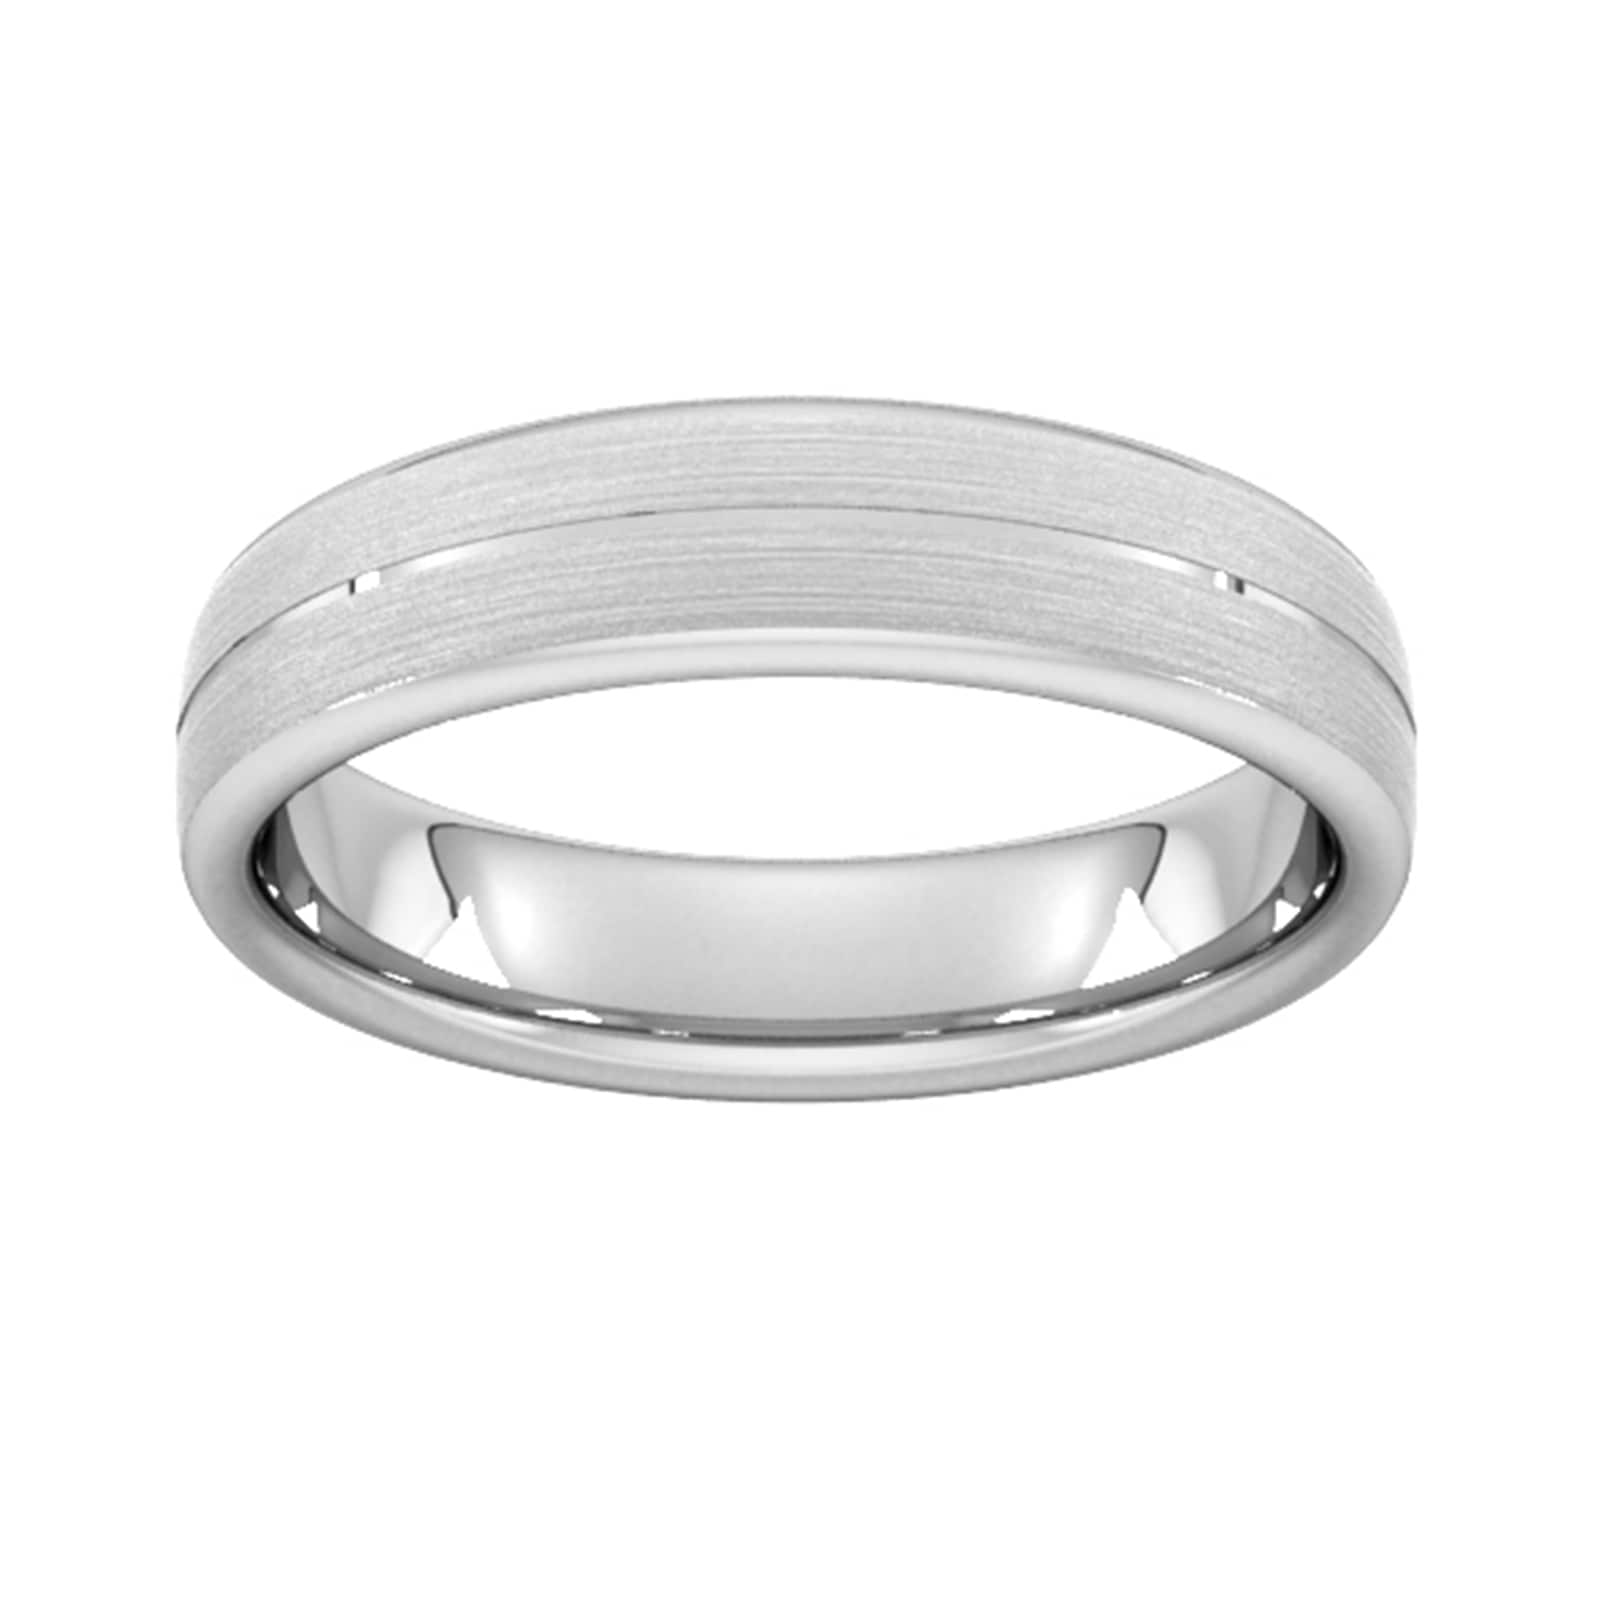 5mm Traditional Court Heavy Centre Groove With Chamfered Edge Wedding Ring In 9 Carat White Gold - Ring Size H